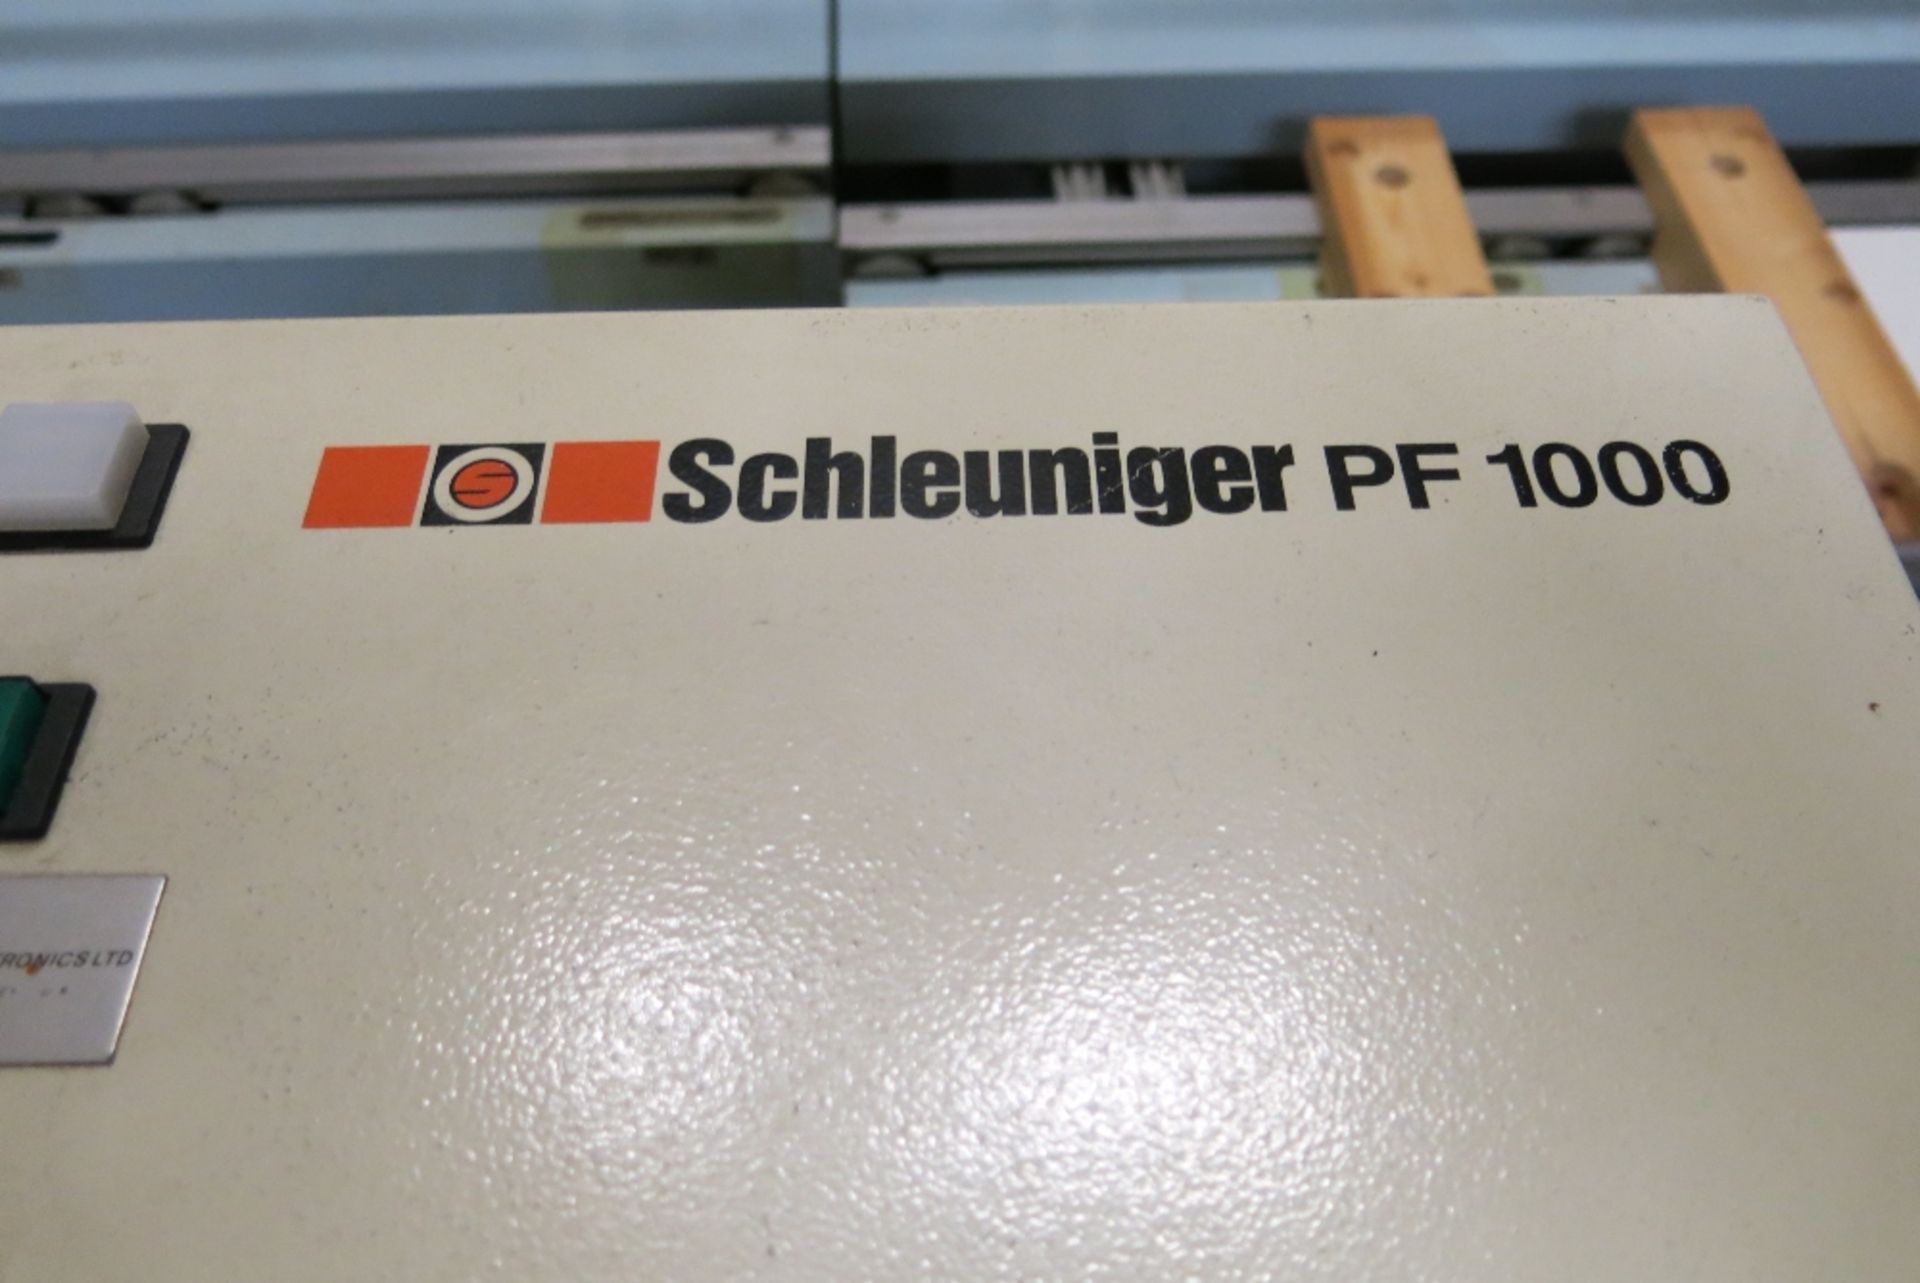 Schleuniger CS9100 automatic wire cutting & stripping machine with PF100 cable feeder - Image 3 of 4